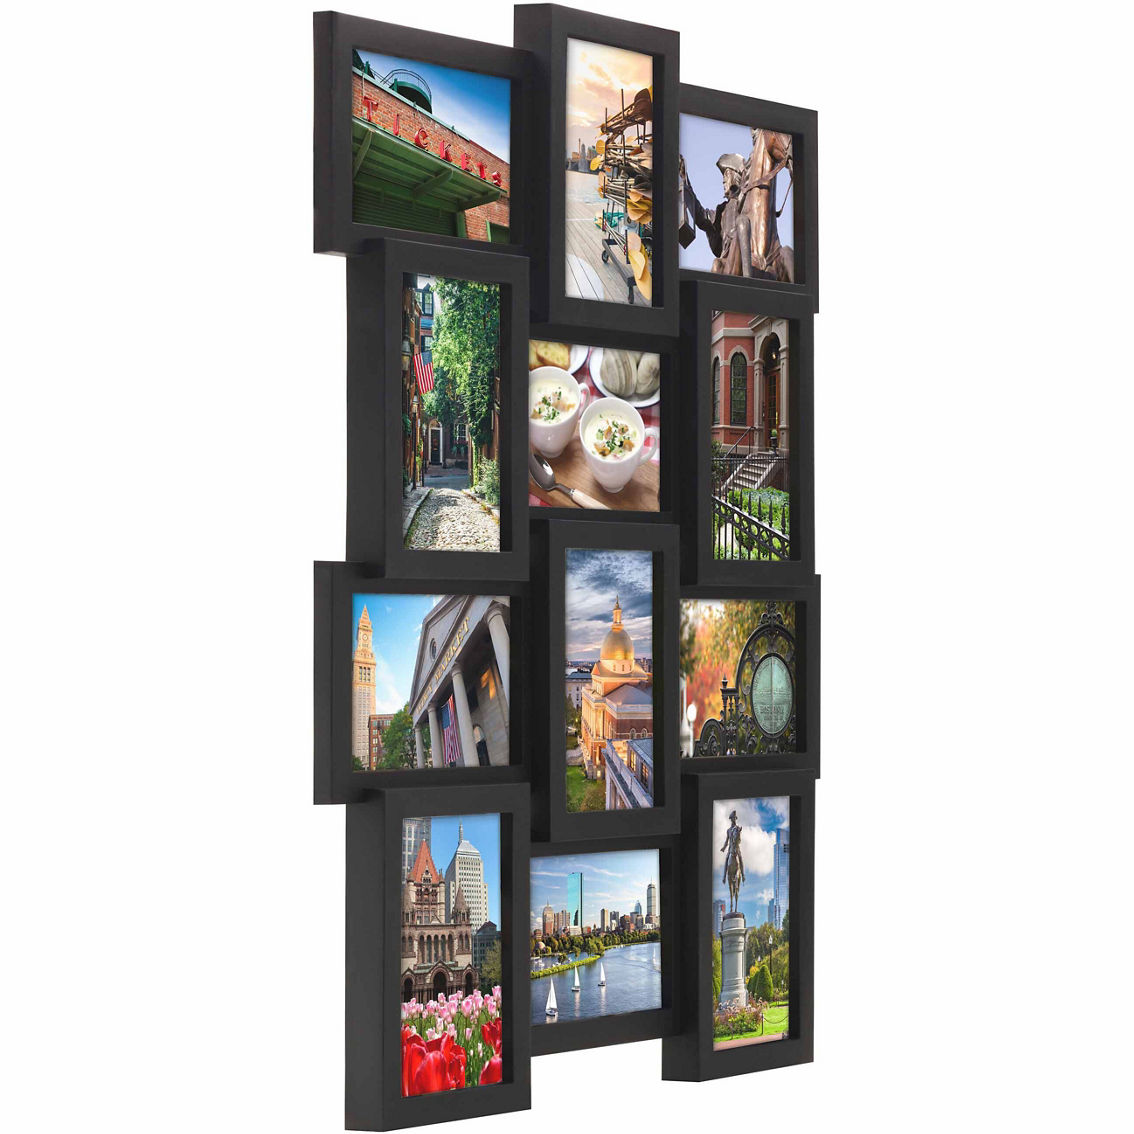 Melannco 18 x 23 in. 12-Opening Photo Collage Frame Black - Image 2 of 5